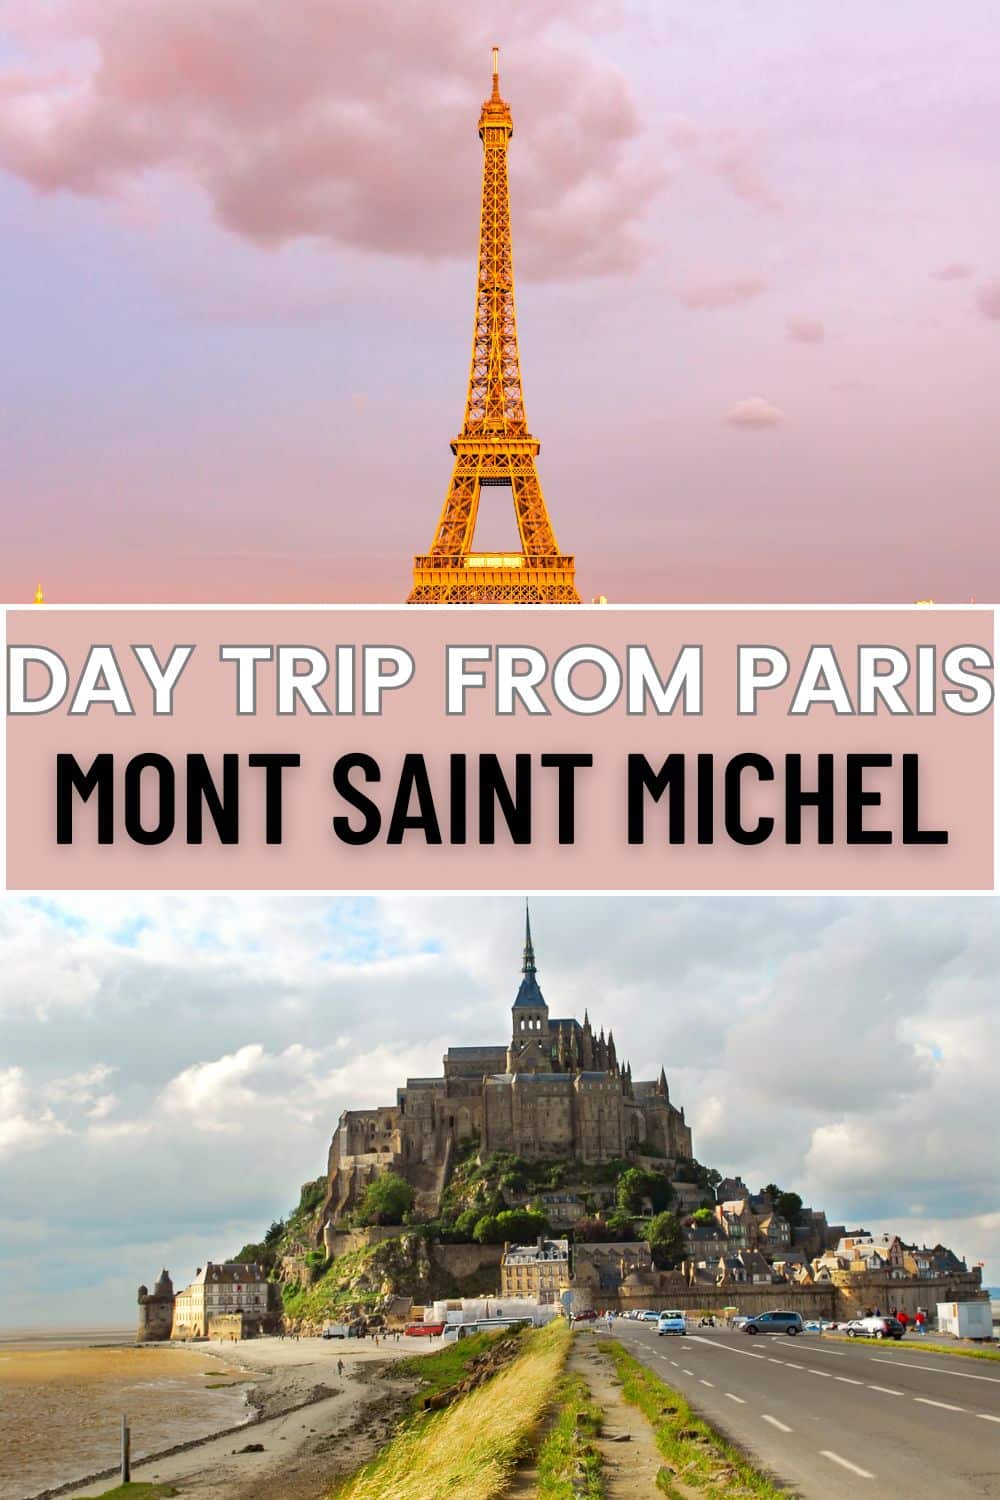 Travel poster highlighting a day trip from Paris to Mont Saint Michel, showing the Eiffel Tower and Mont Saint Michel, symbolizing a journey from the French capital to the historic island, promoting its accessibility and appeal.